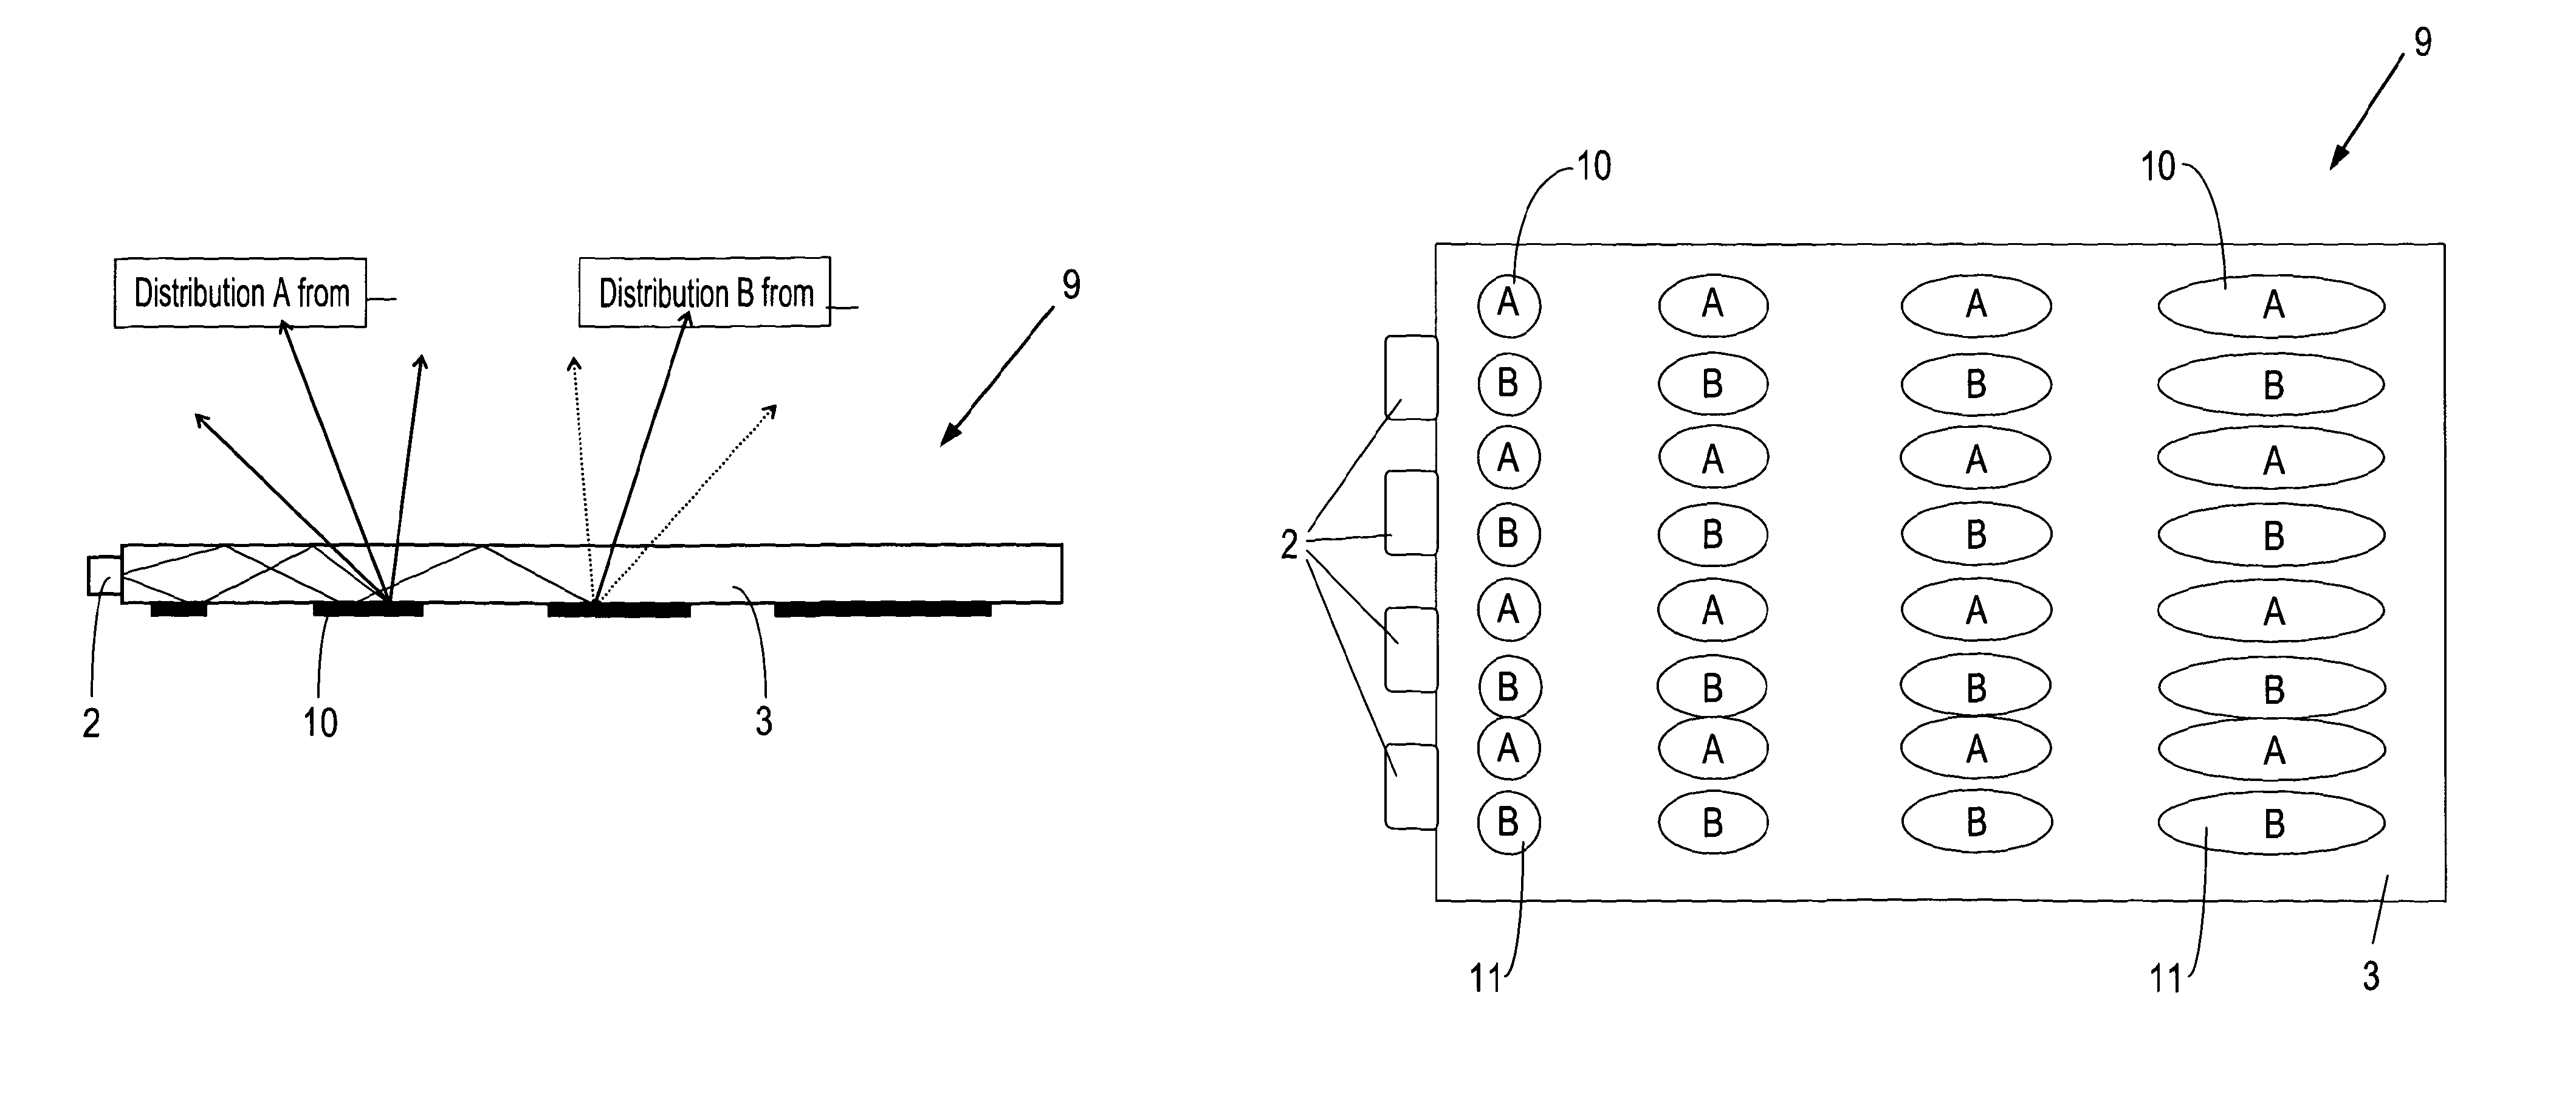 Light guide device